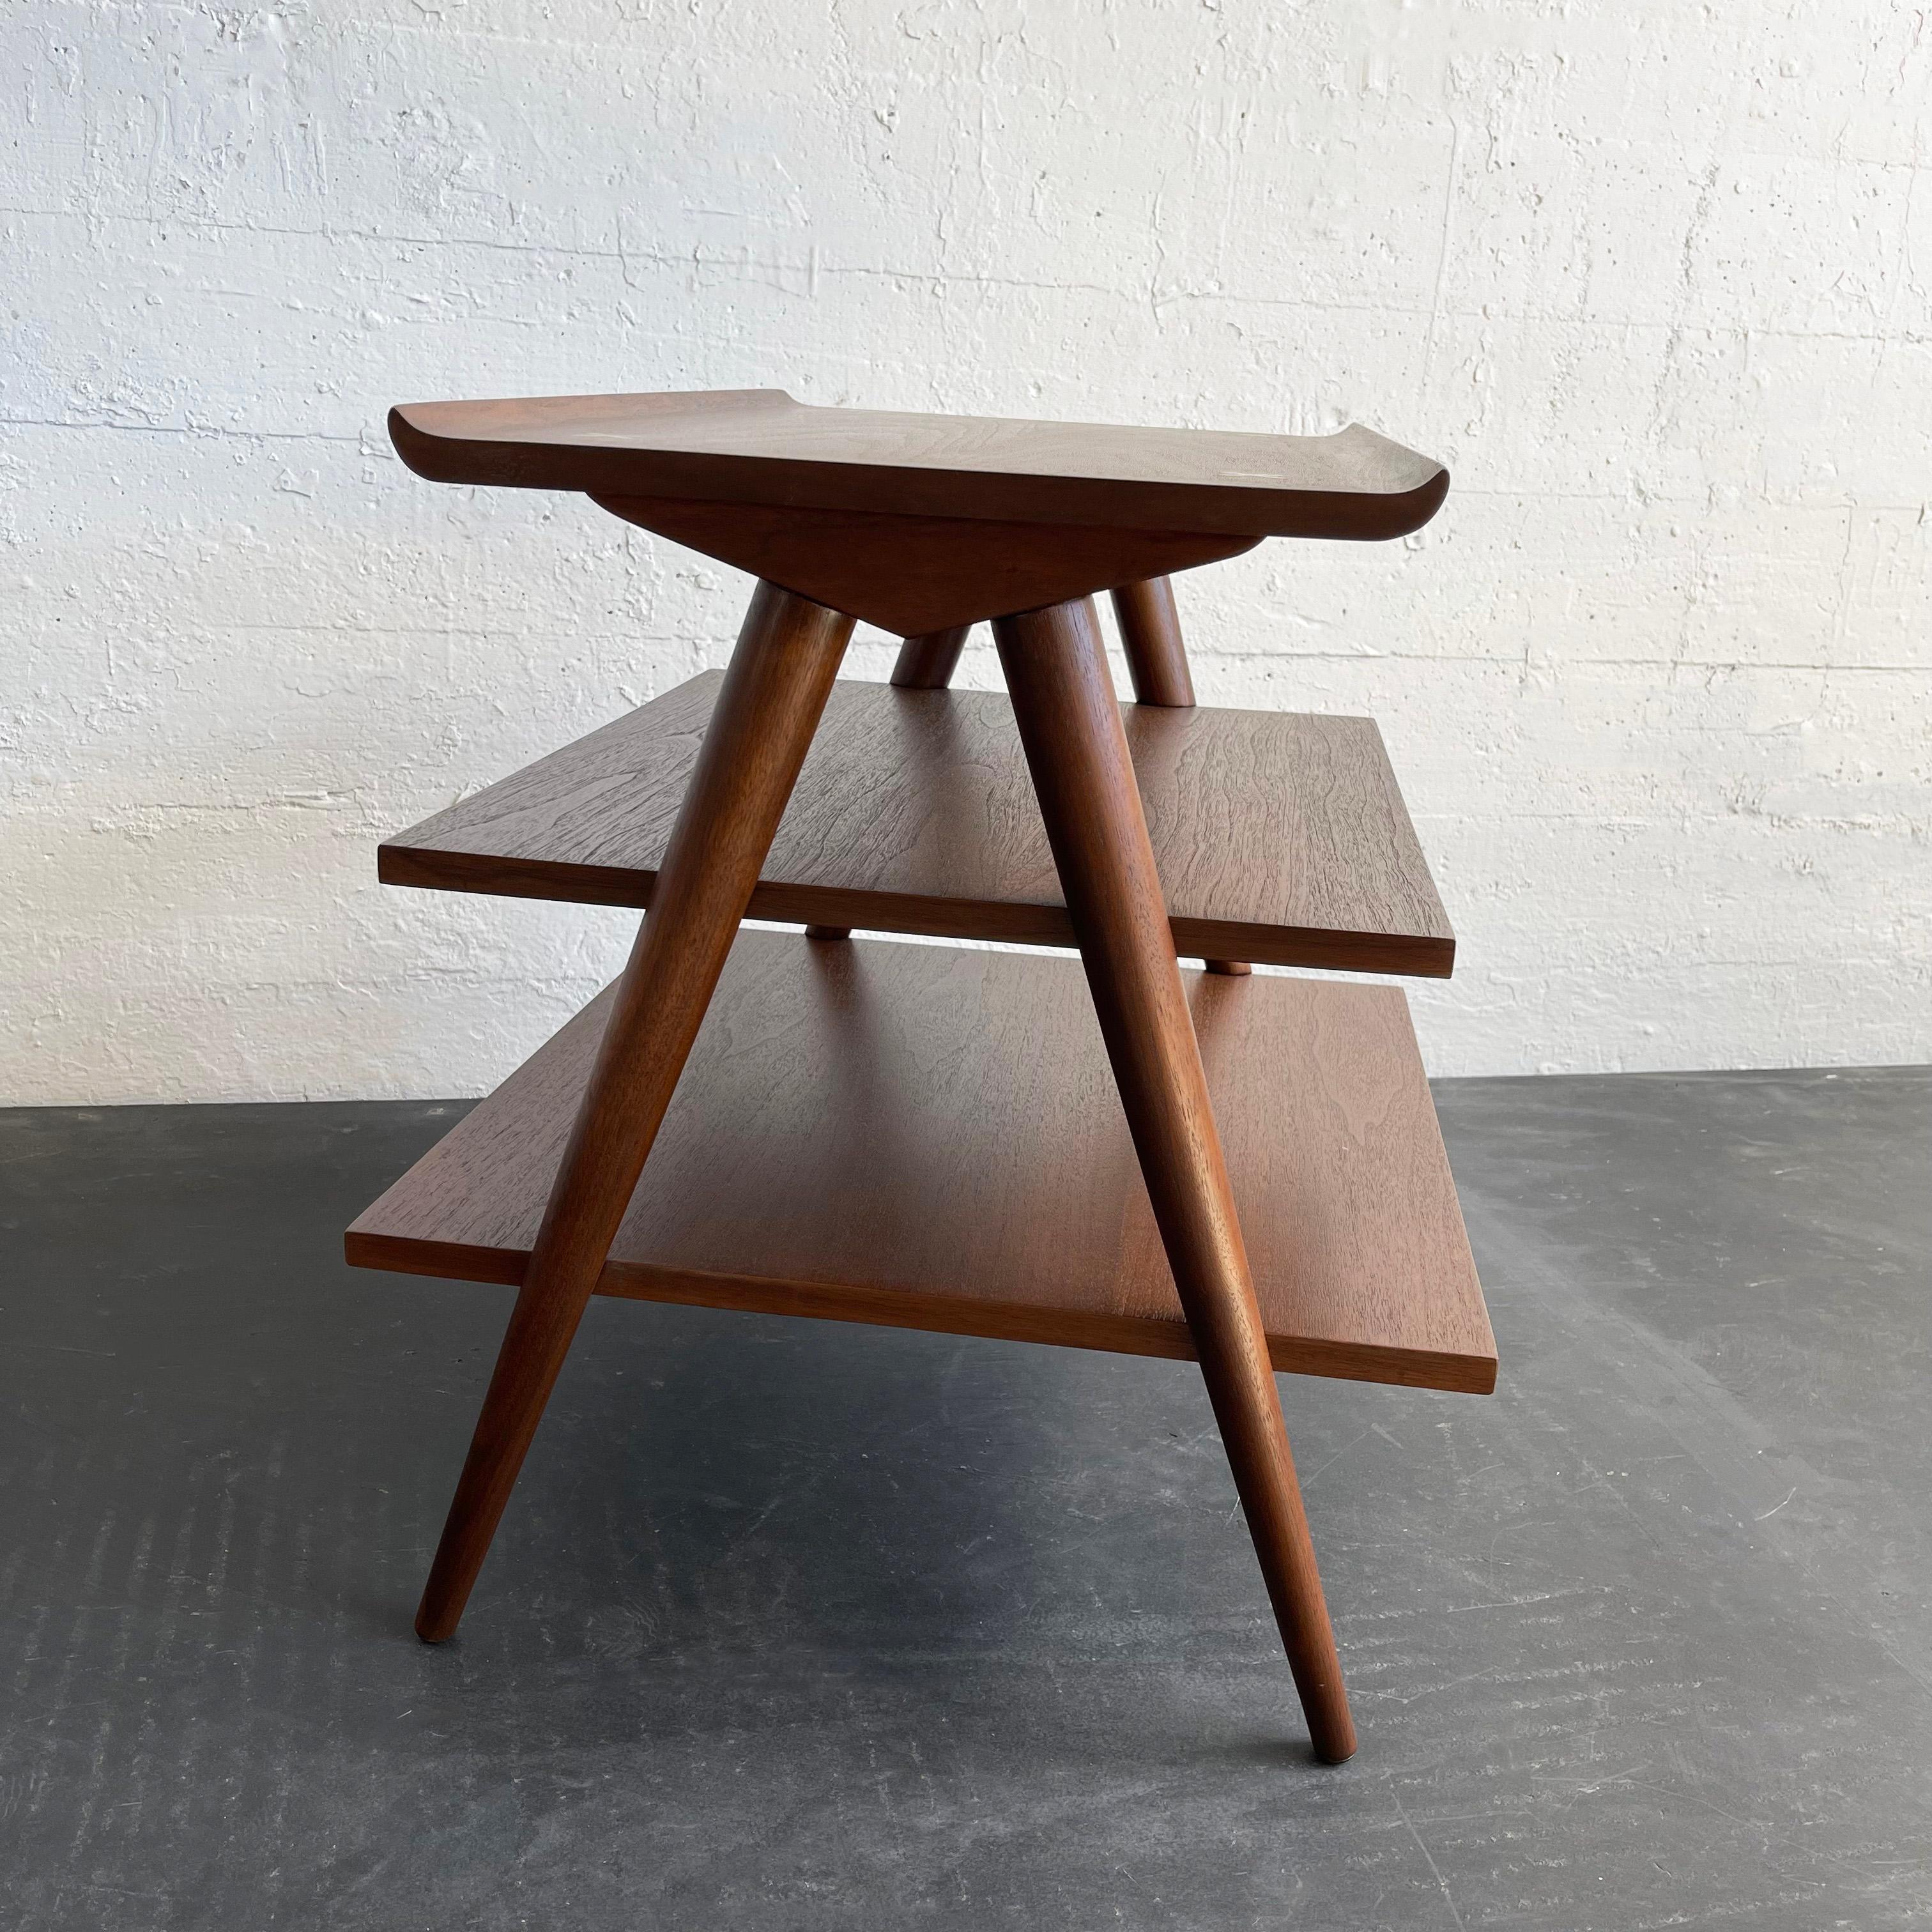 Mid Century Modern Tiered Side Table By Merton Gershun, American Of Martinsville In Good Condition For Sale In Brooklyn, NY